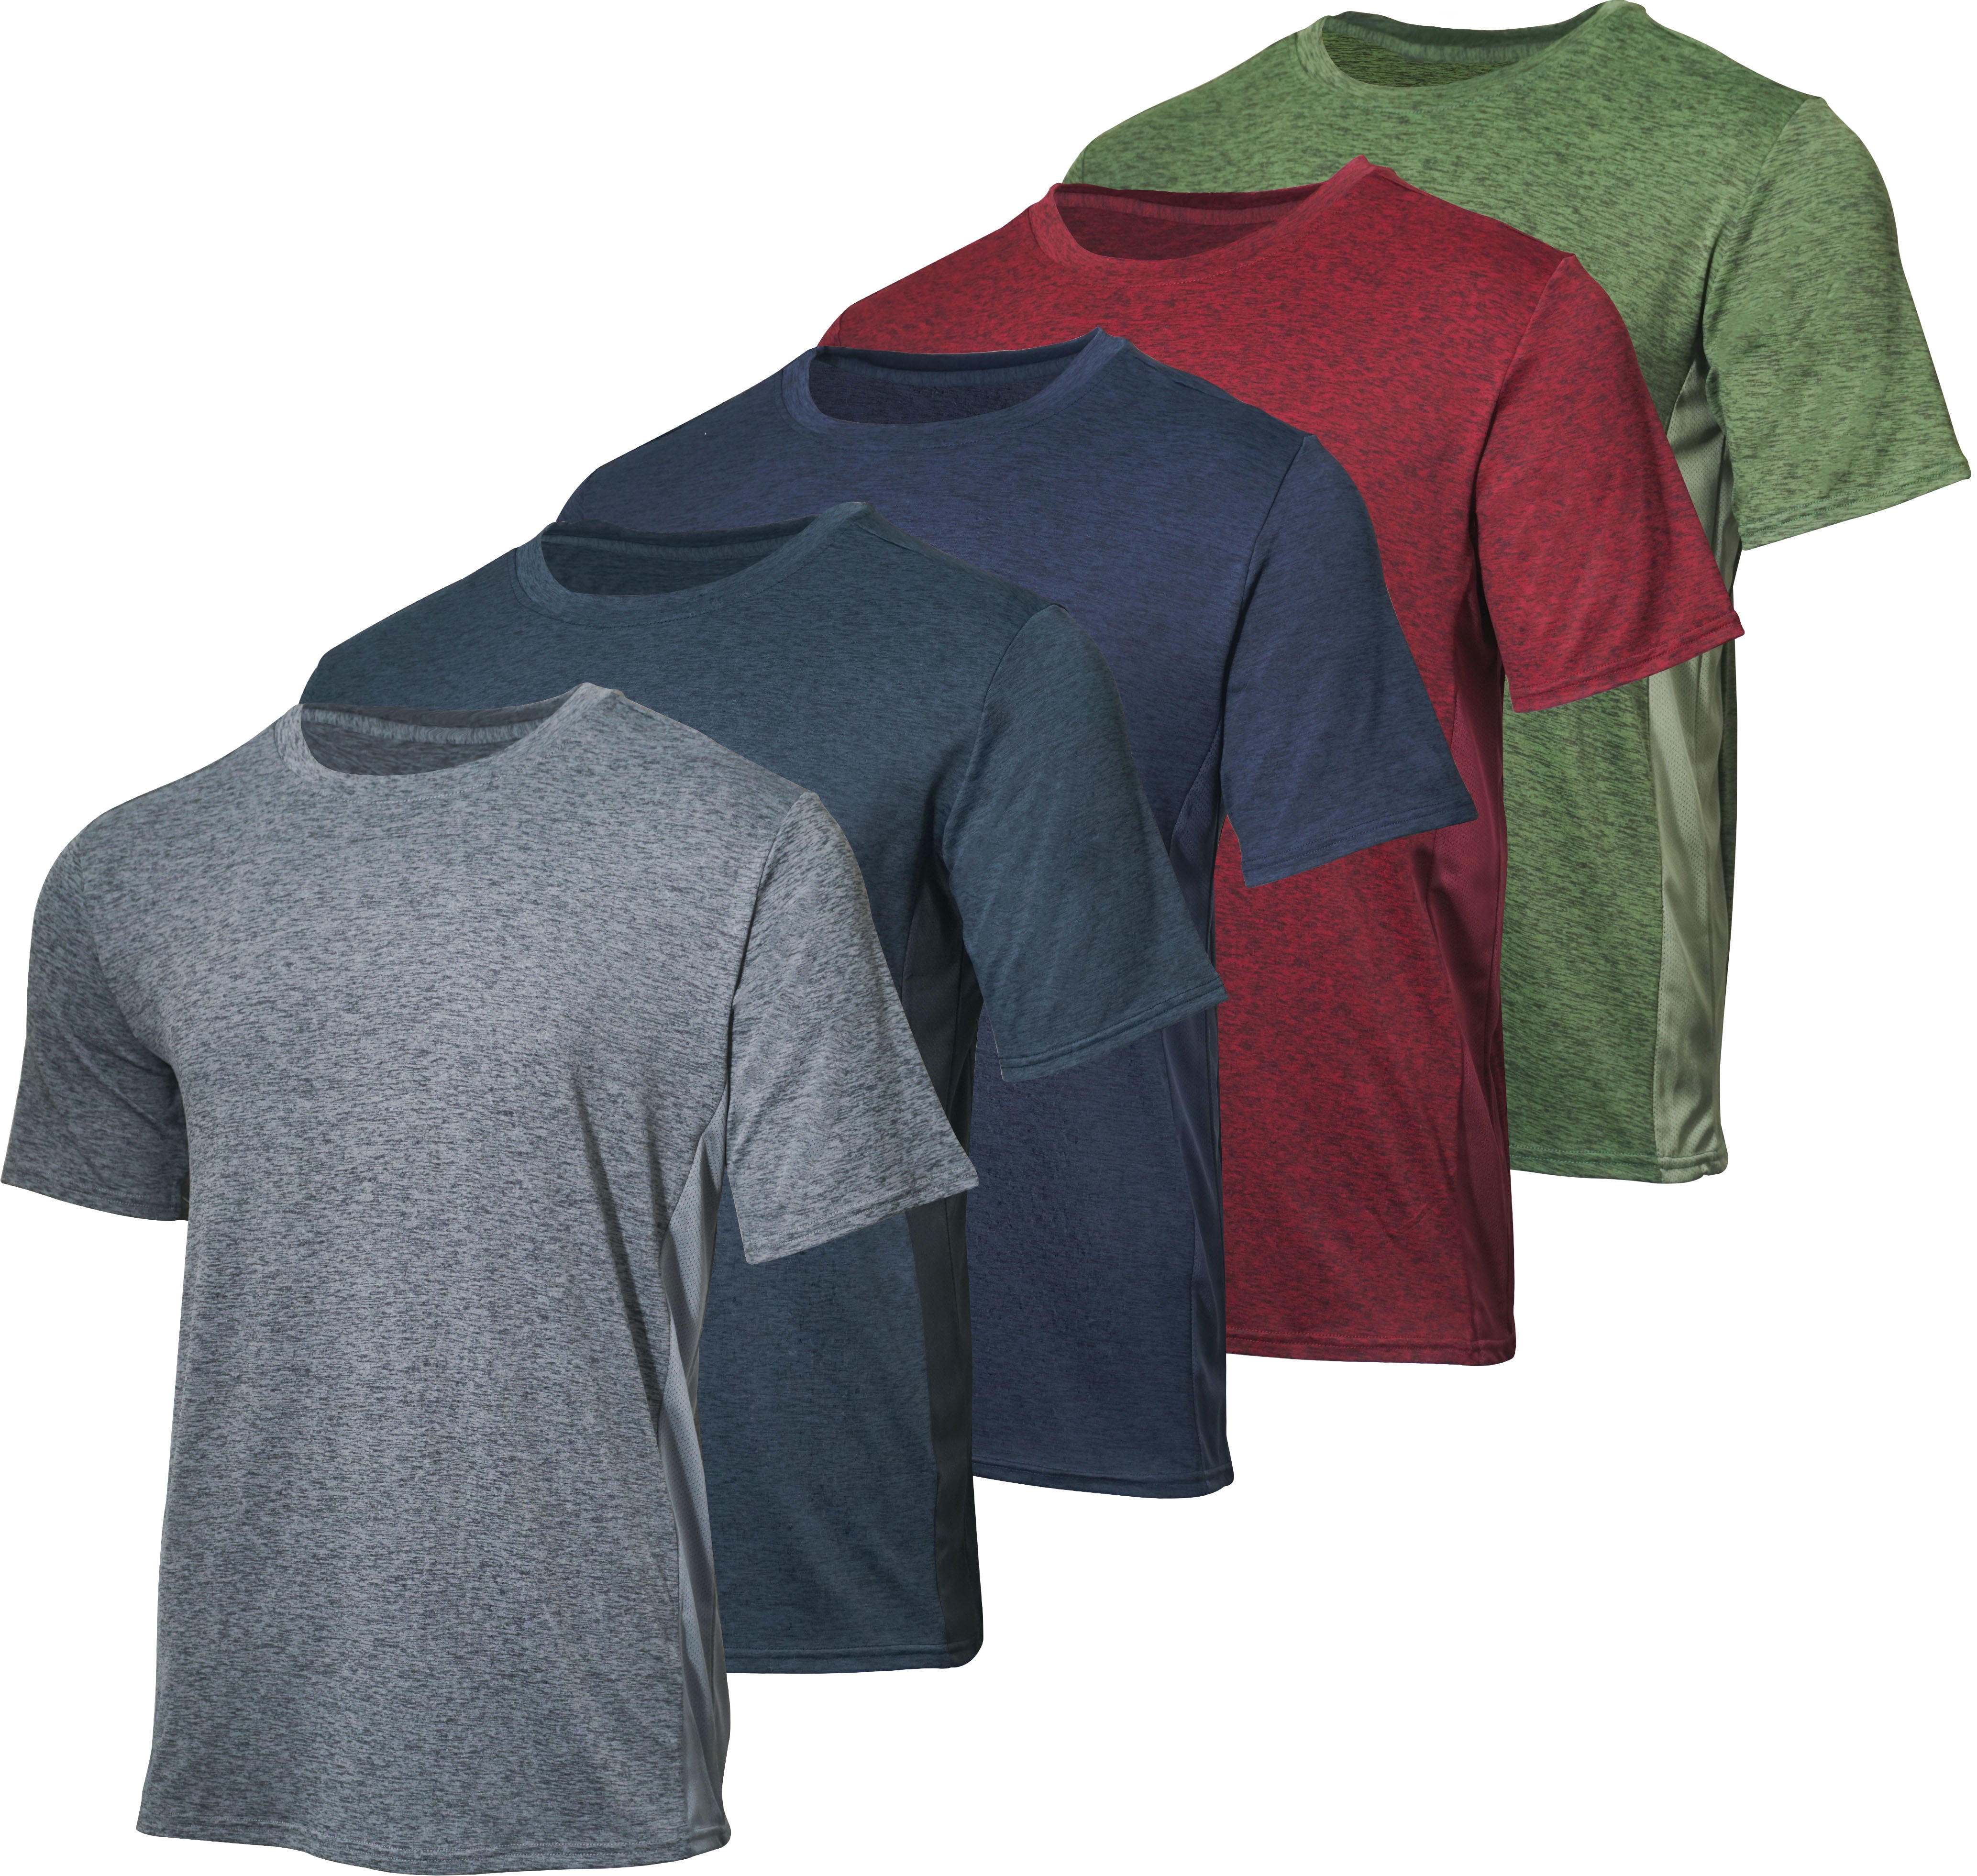 fit dry shirts